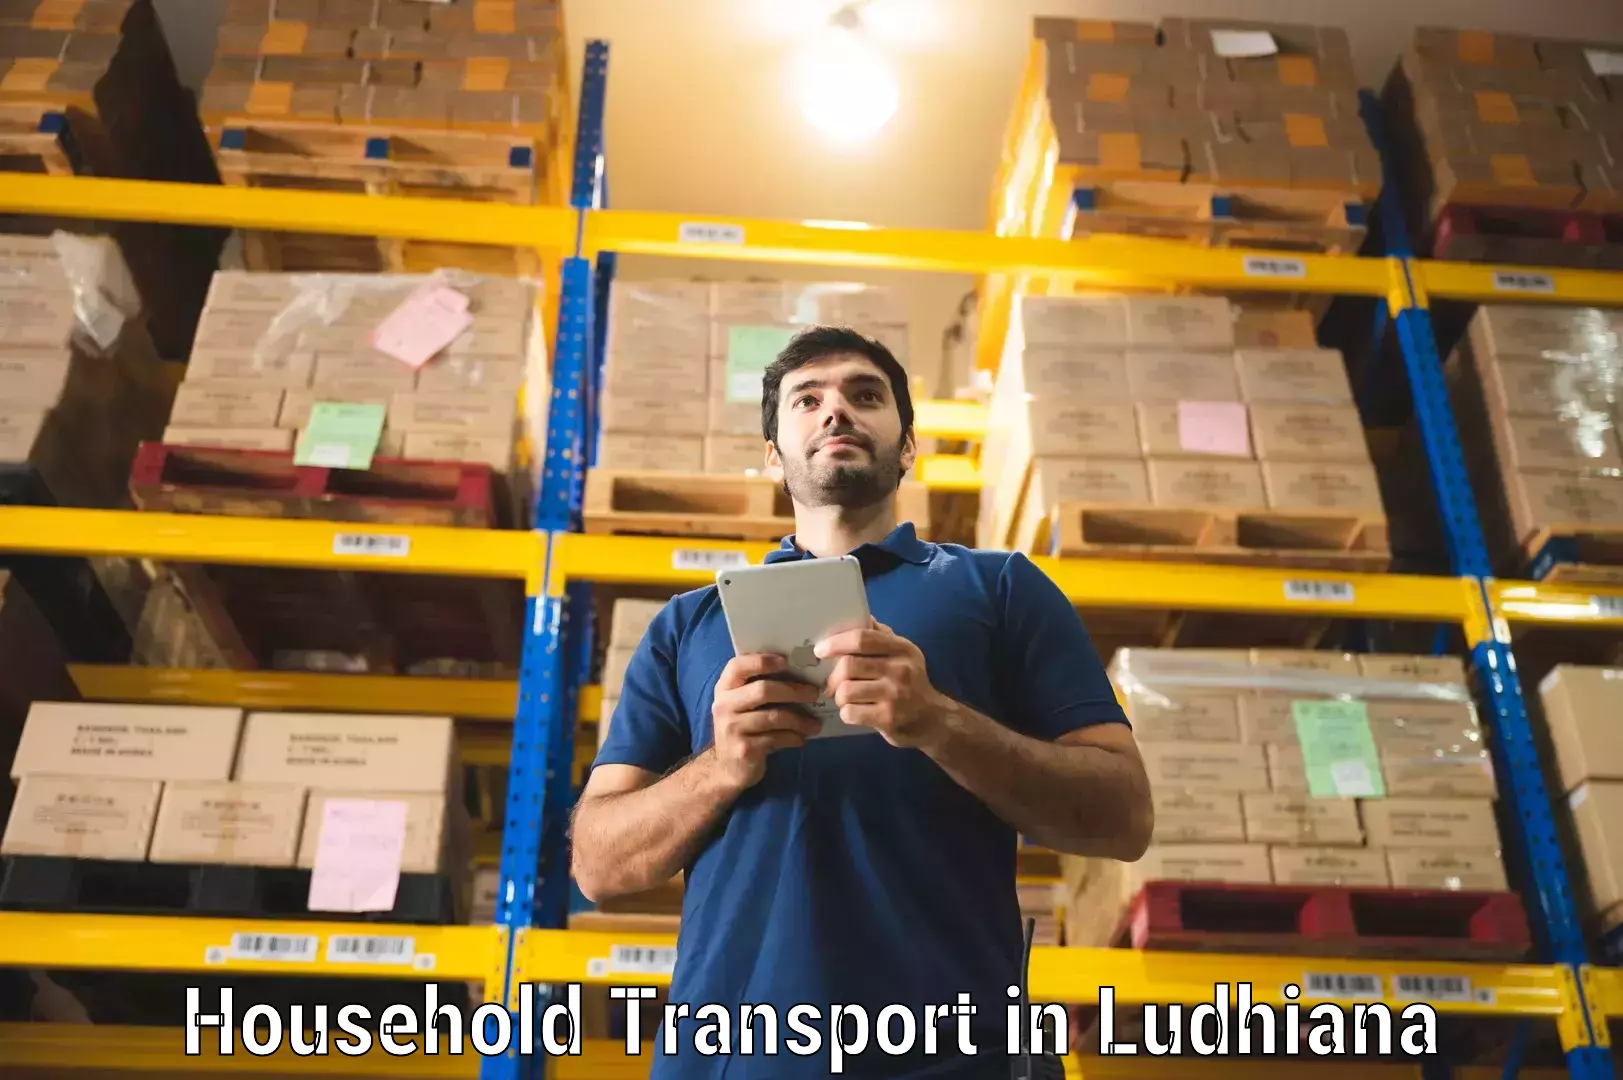 Household transport experts in Ludhiana